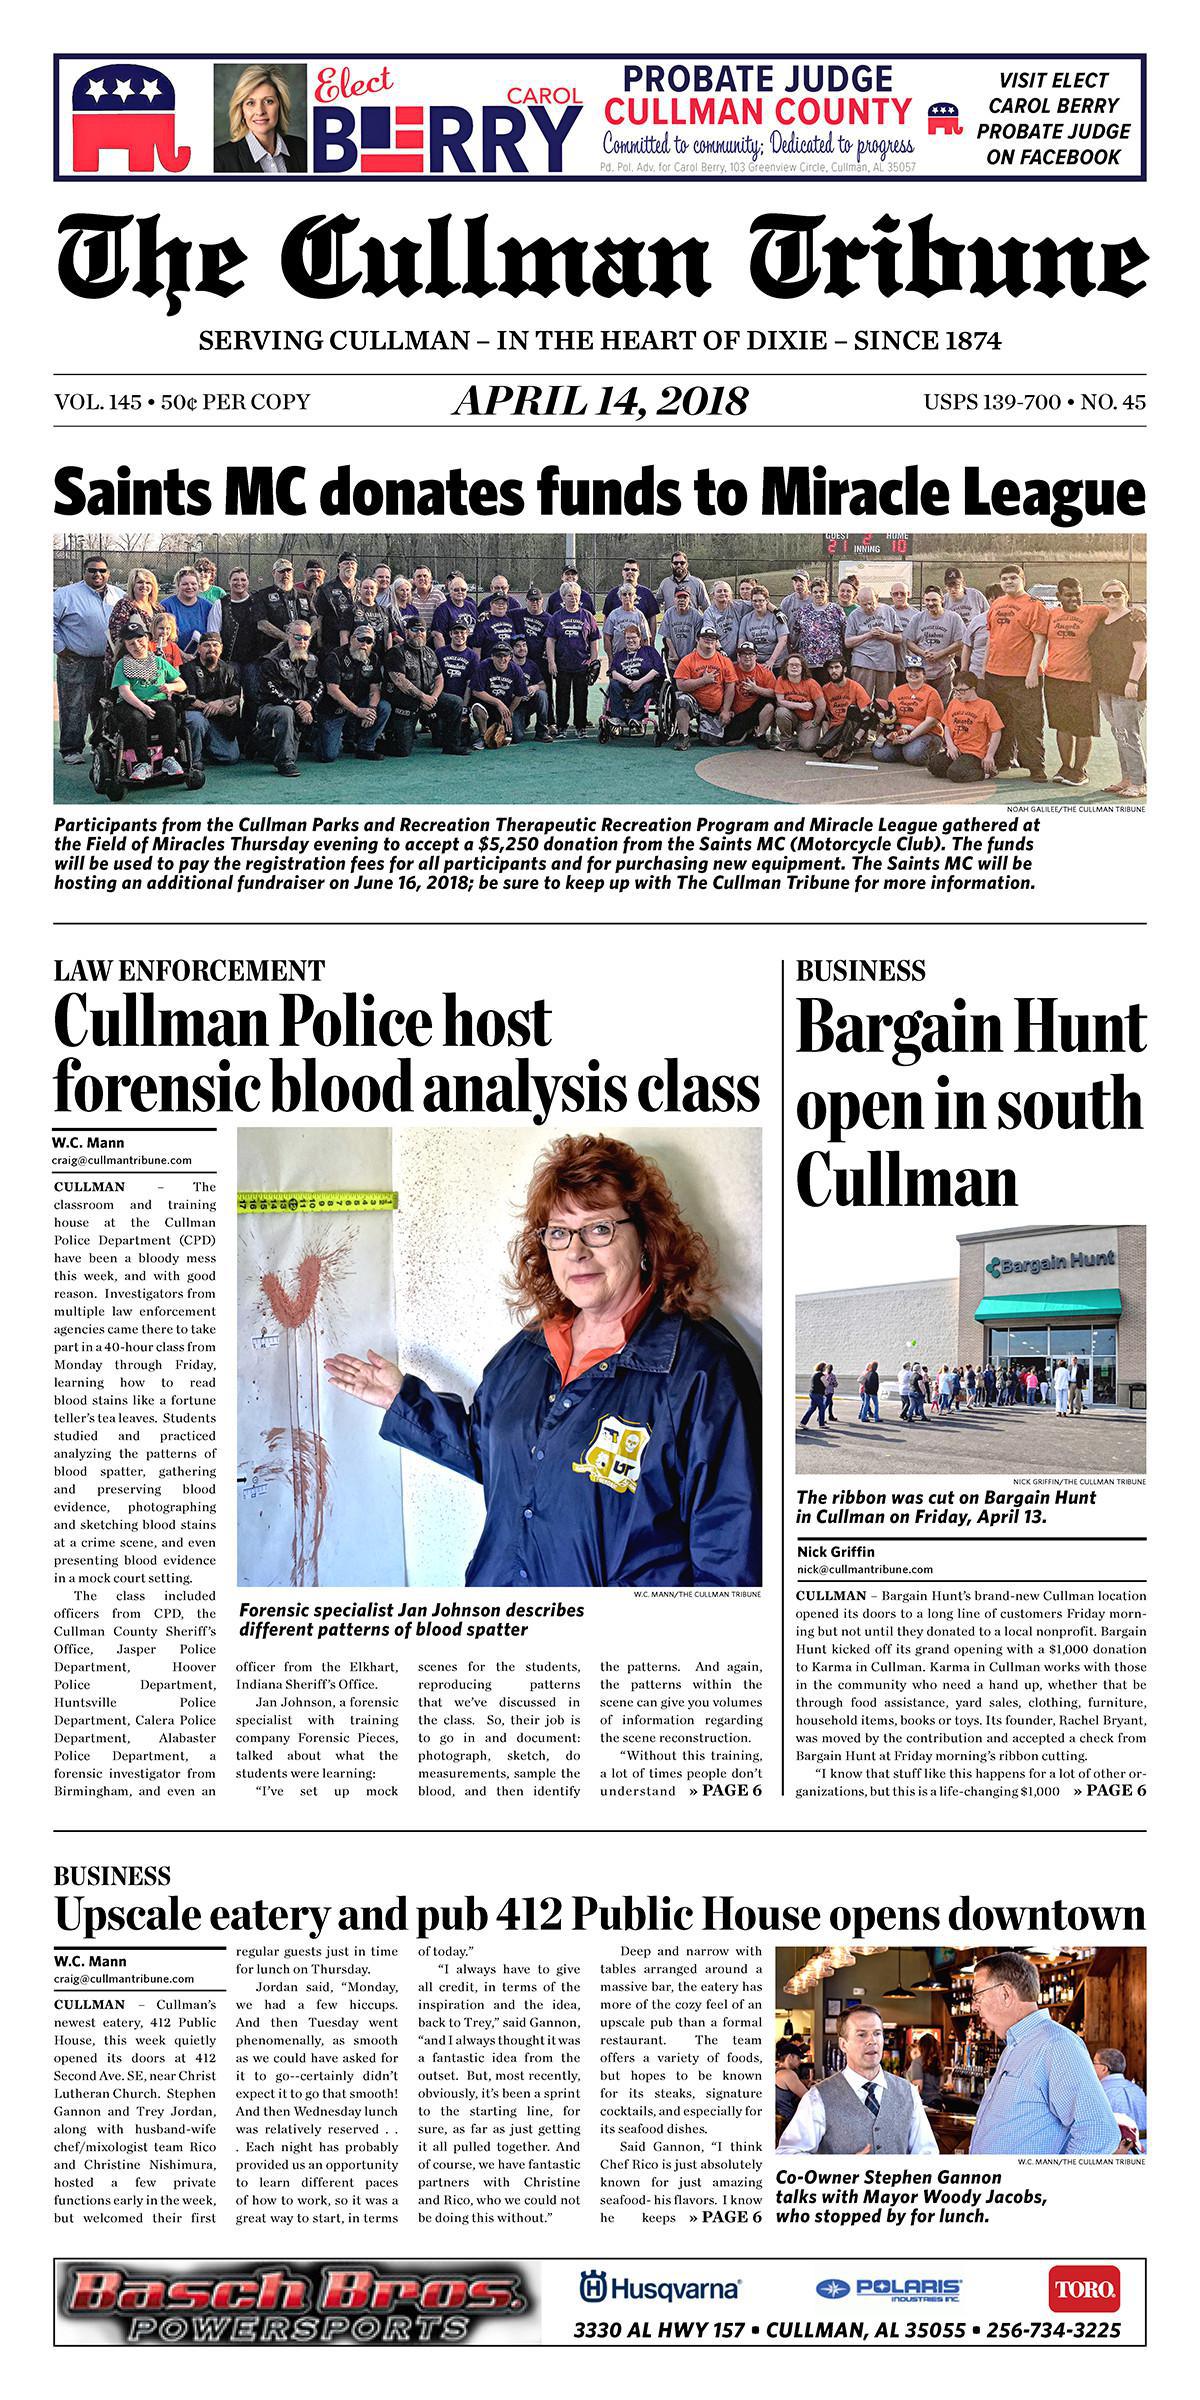 Good Morning Cullman! The 04-14-2018 edition of the Cullman Tribune is now ready to view